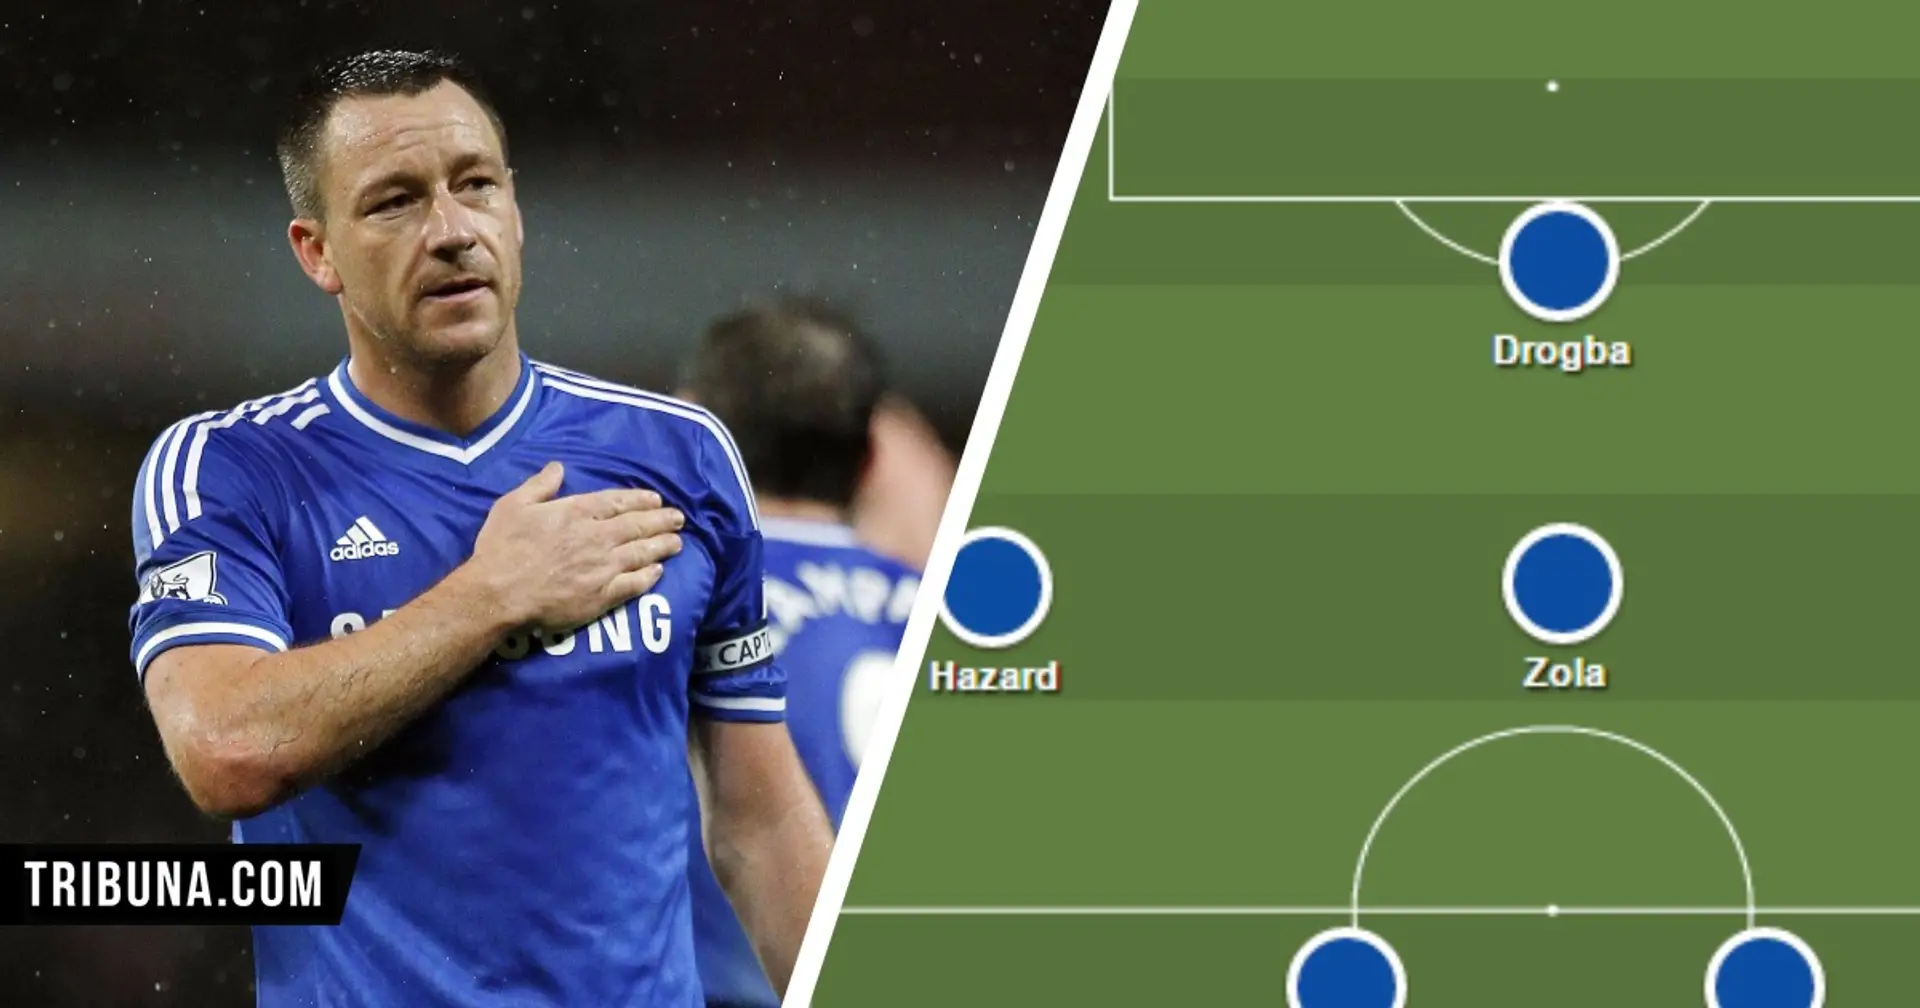 John Terry's all-time Chelsea best XI is hard to argue with